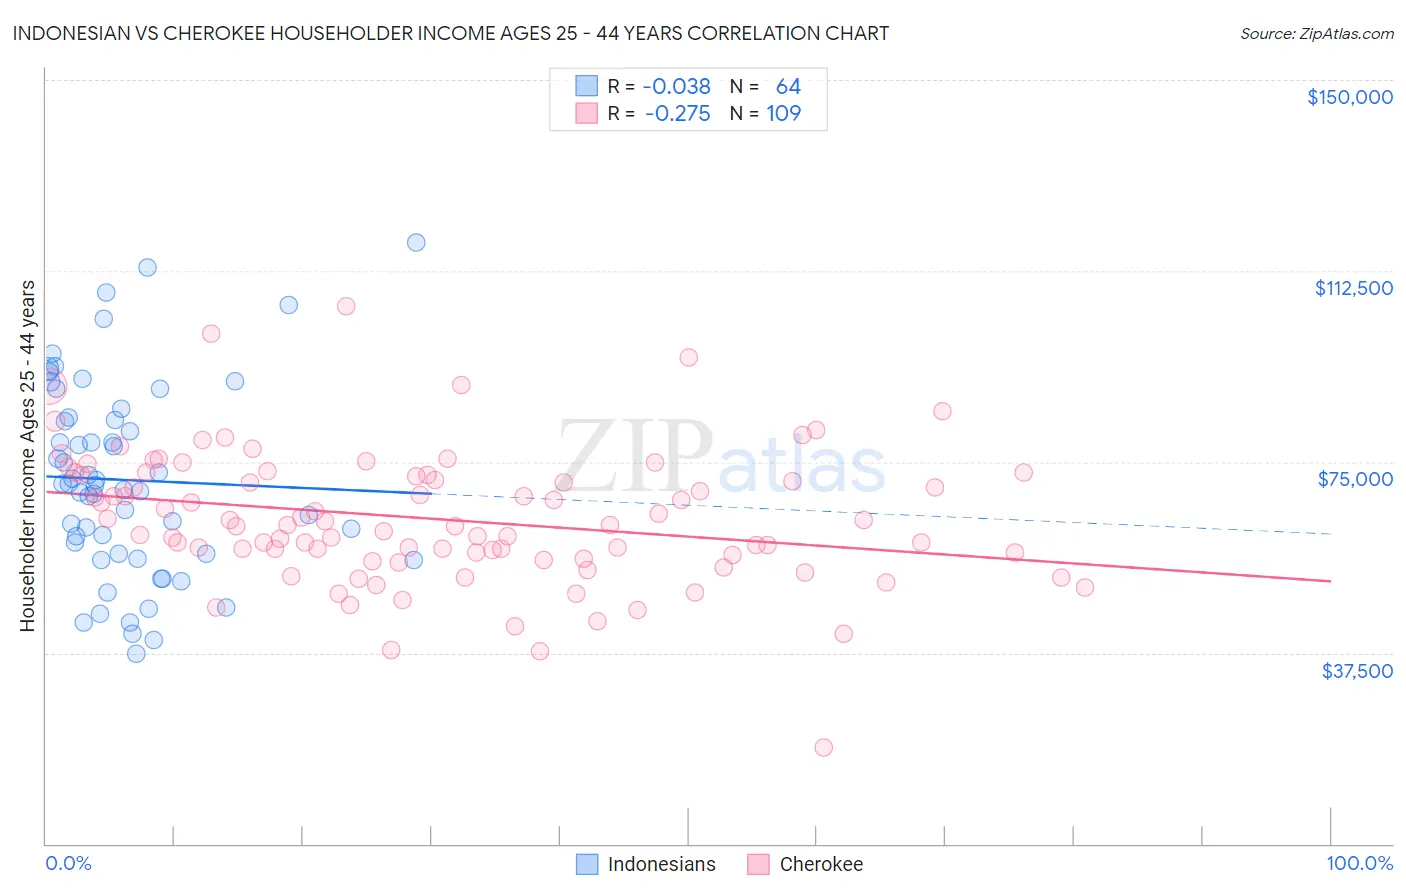 Indonesian vs Cherokee Householder Income Ages 25 - 44 years